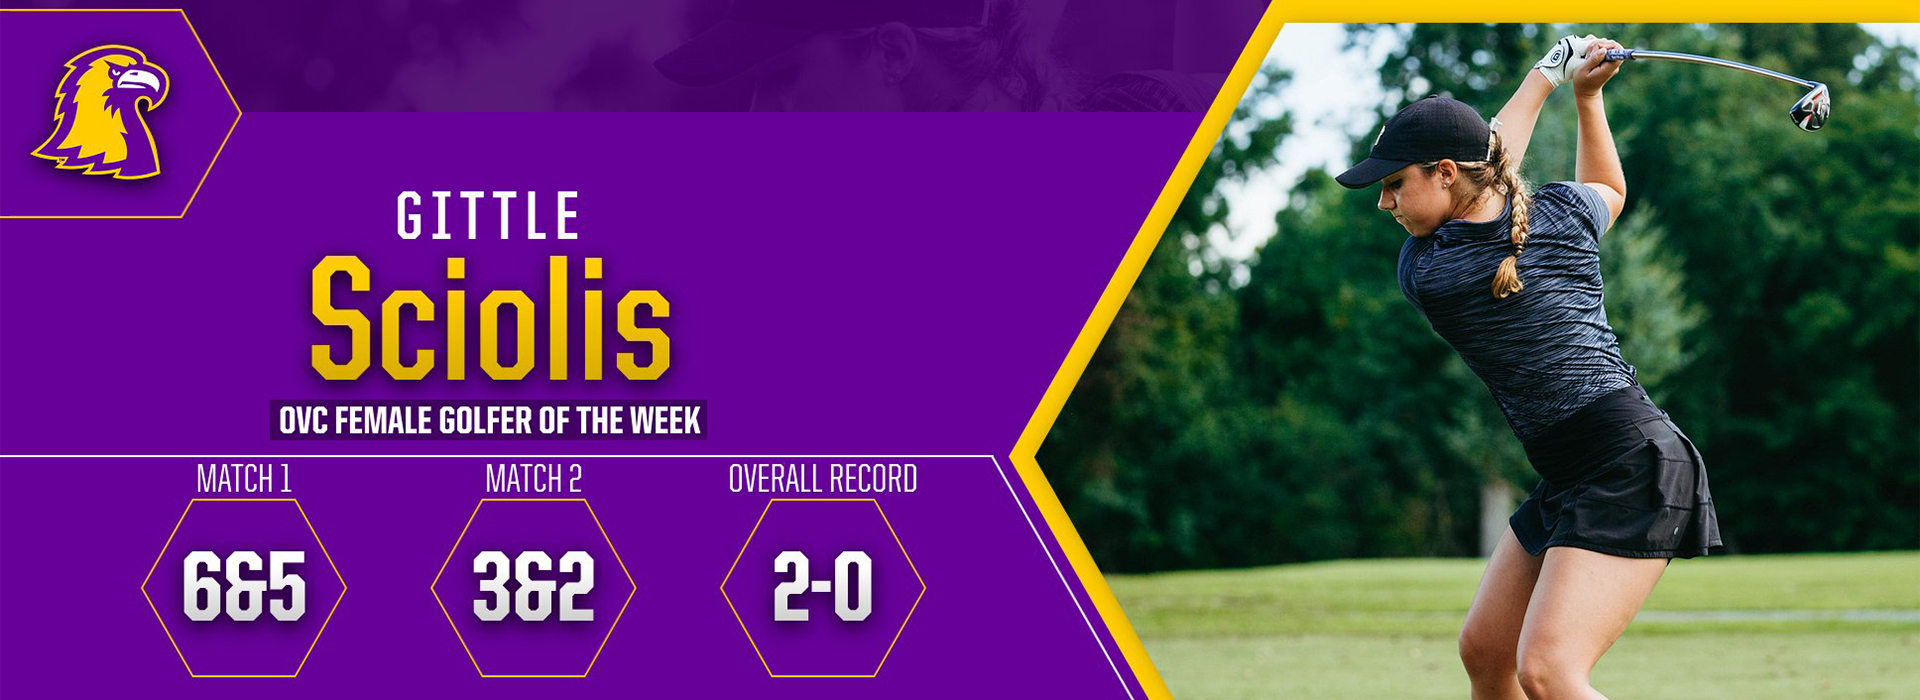 Sciolis recognized as OVC Female Golfer of the Week for second time